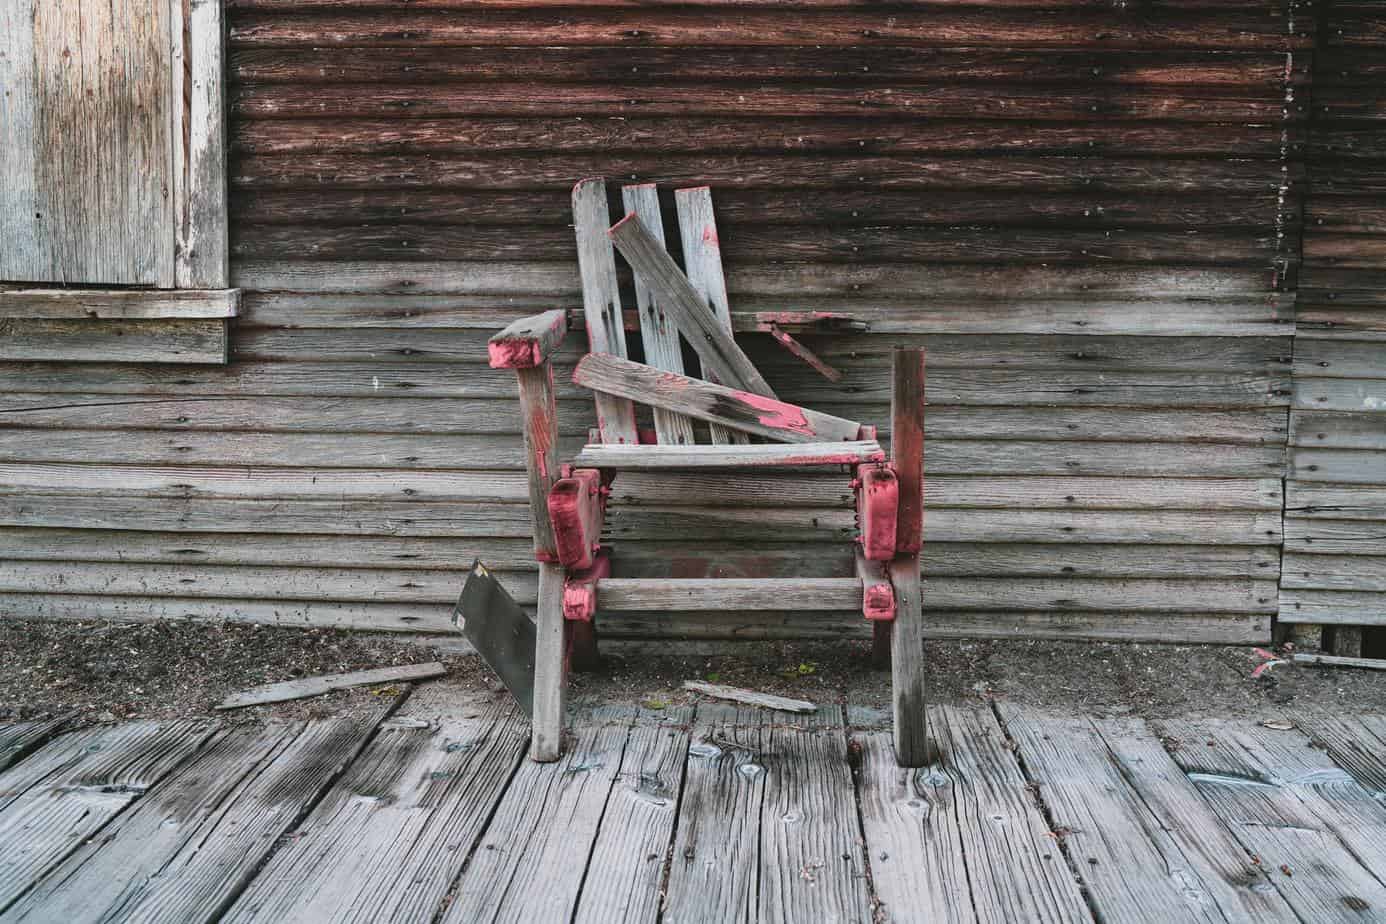 photo of a old broken wood chair on a old work wood deck and wall.